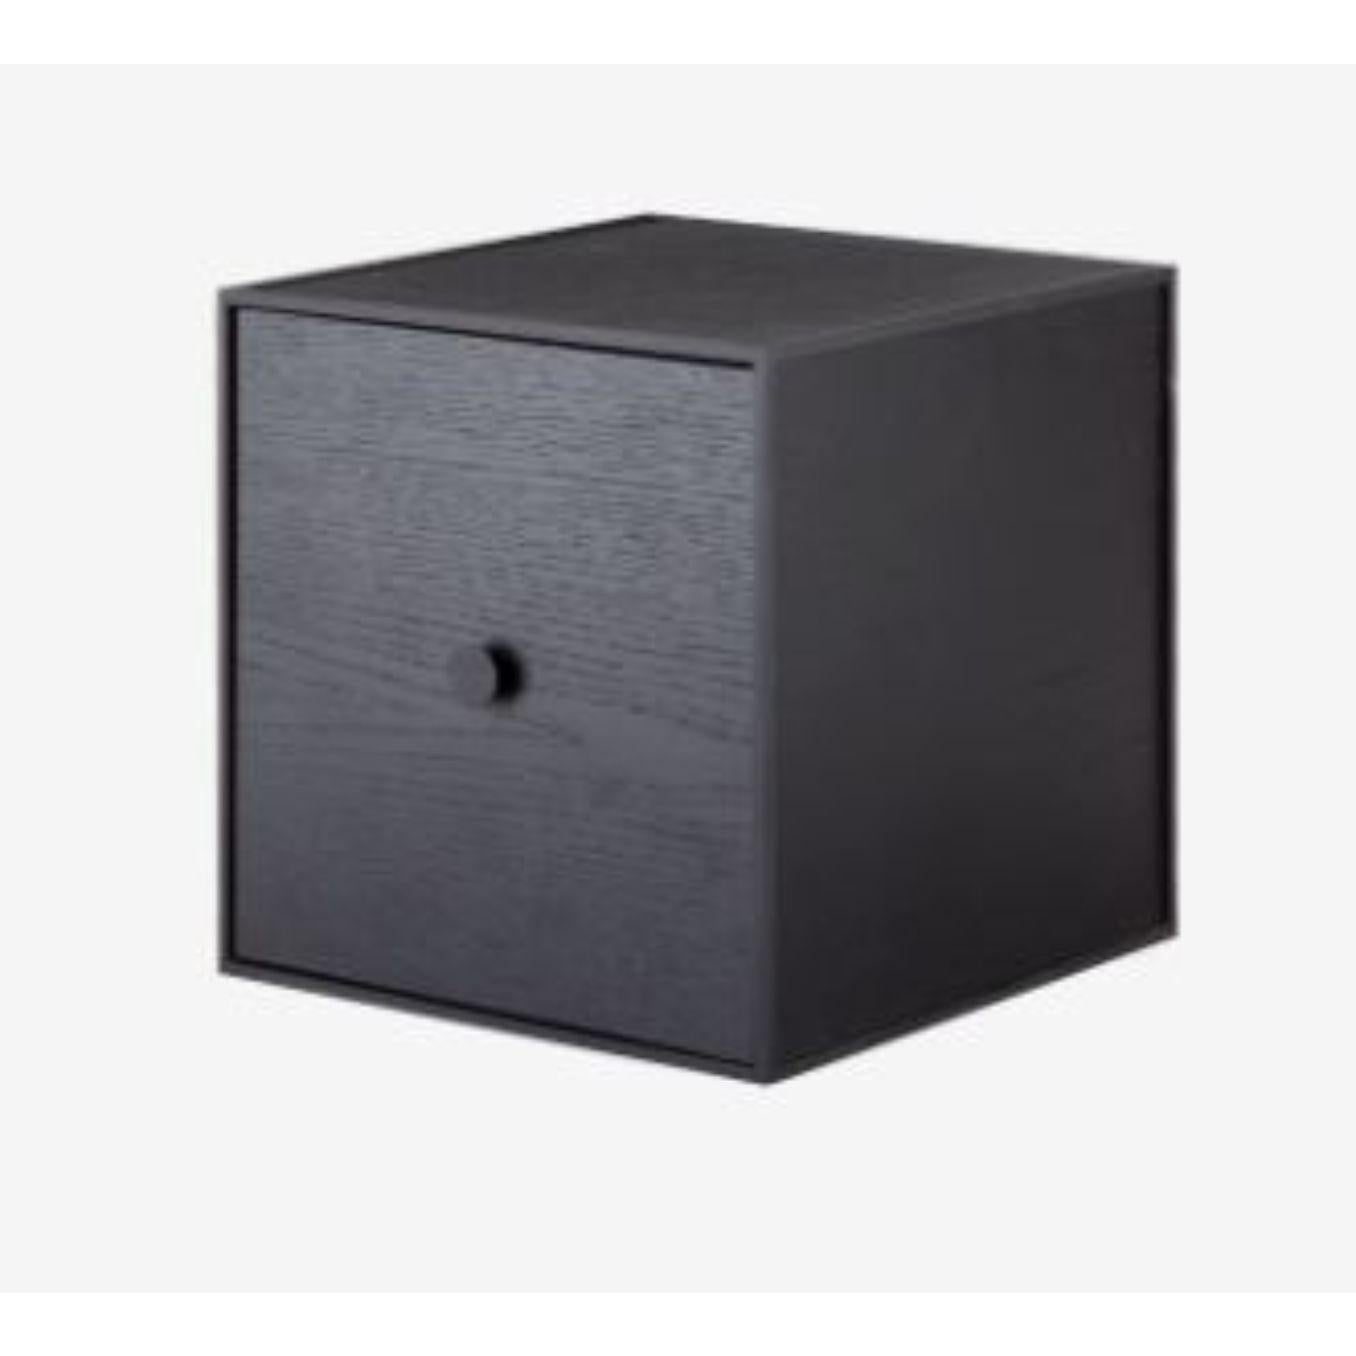 28 black ash frame box with door by Lassen
Dimensions: W 28 x D 28 x H 28 cm 
Materials: Finér, Melamin, Melamin, Melamine, Metal, Veneer,
Also available in different colors and dimensions. 

By Lassen is a Danish design brand focused on iconic